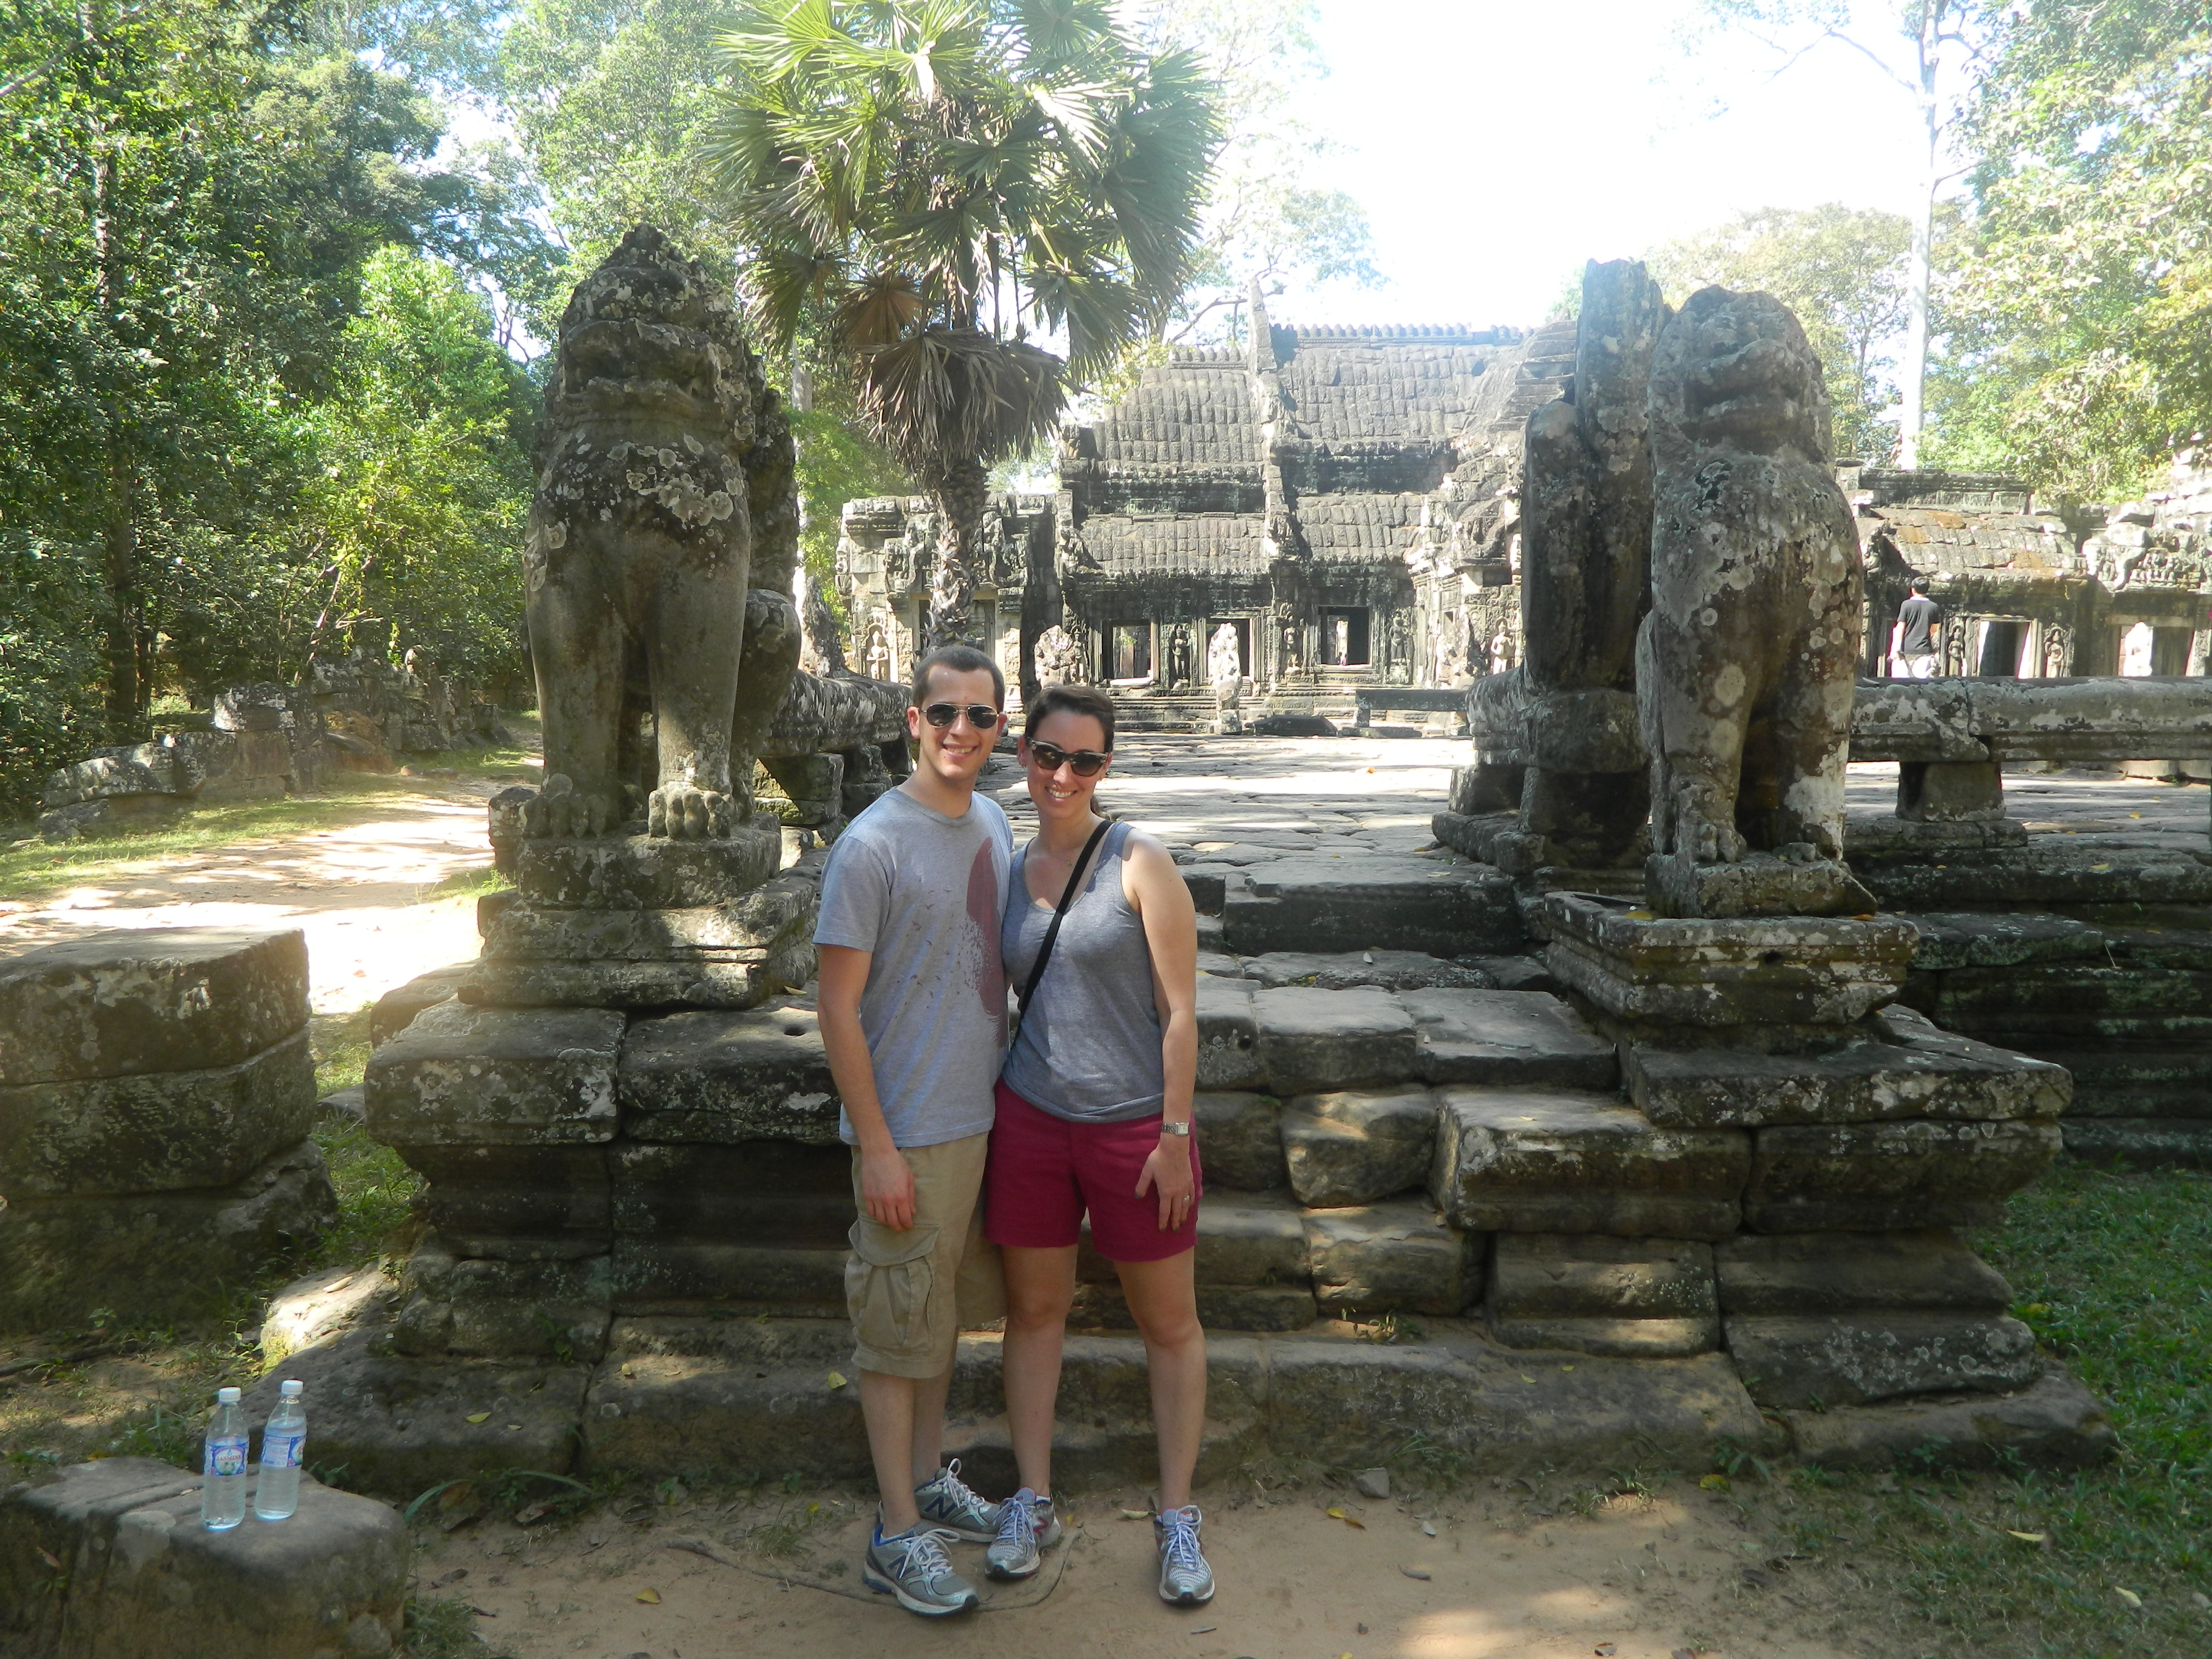 TRAVEL: Siem Reap, Cambodia - TRAVEL: Siem Reap Cambodia by popular New Jersey travel blogger What's For Dinner Esq.